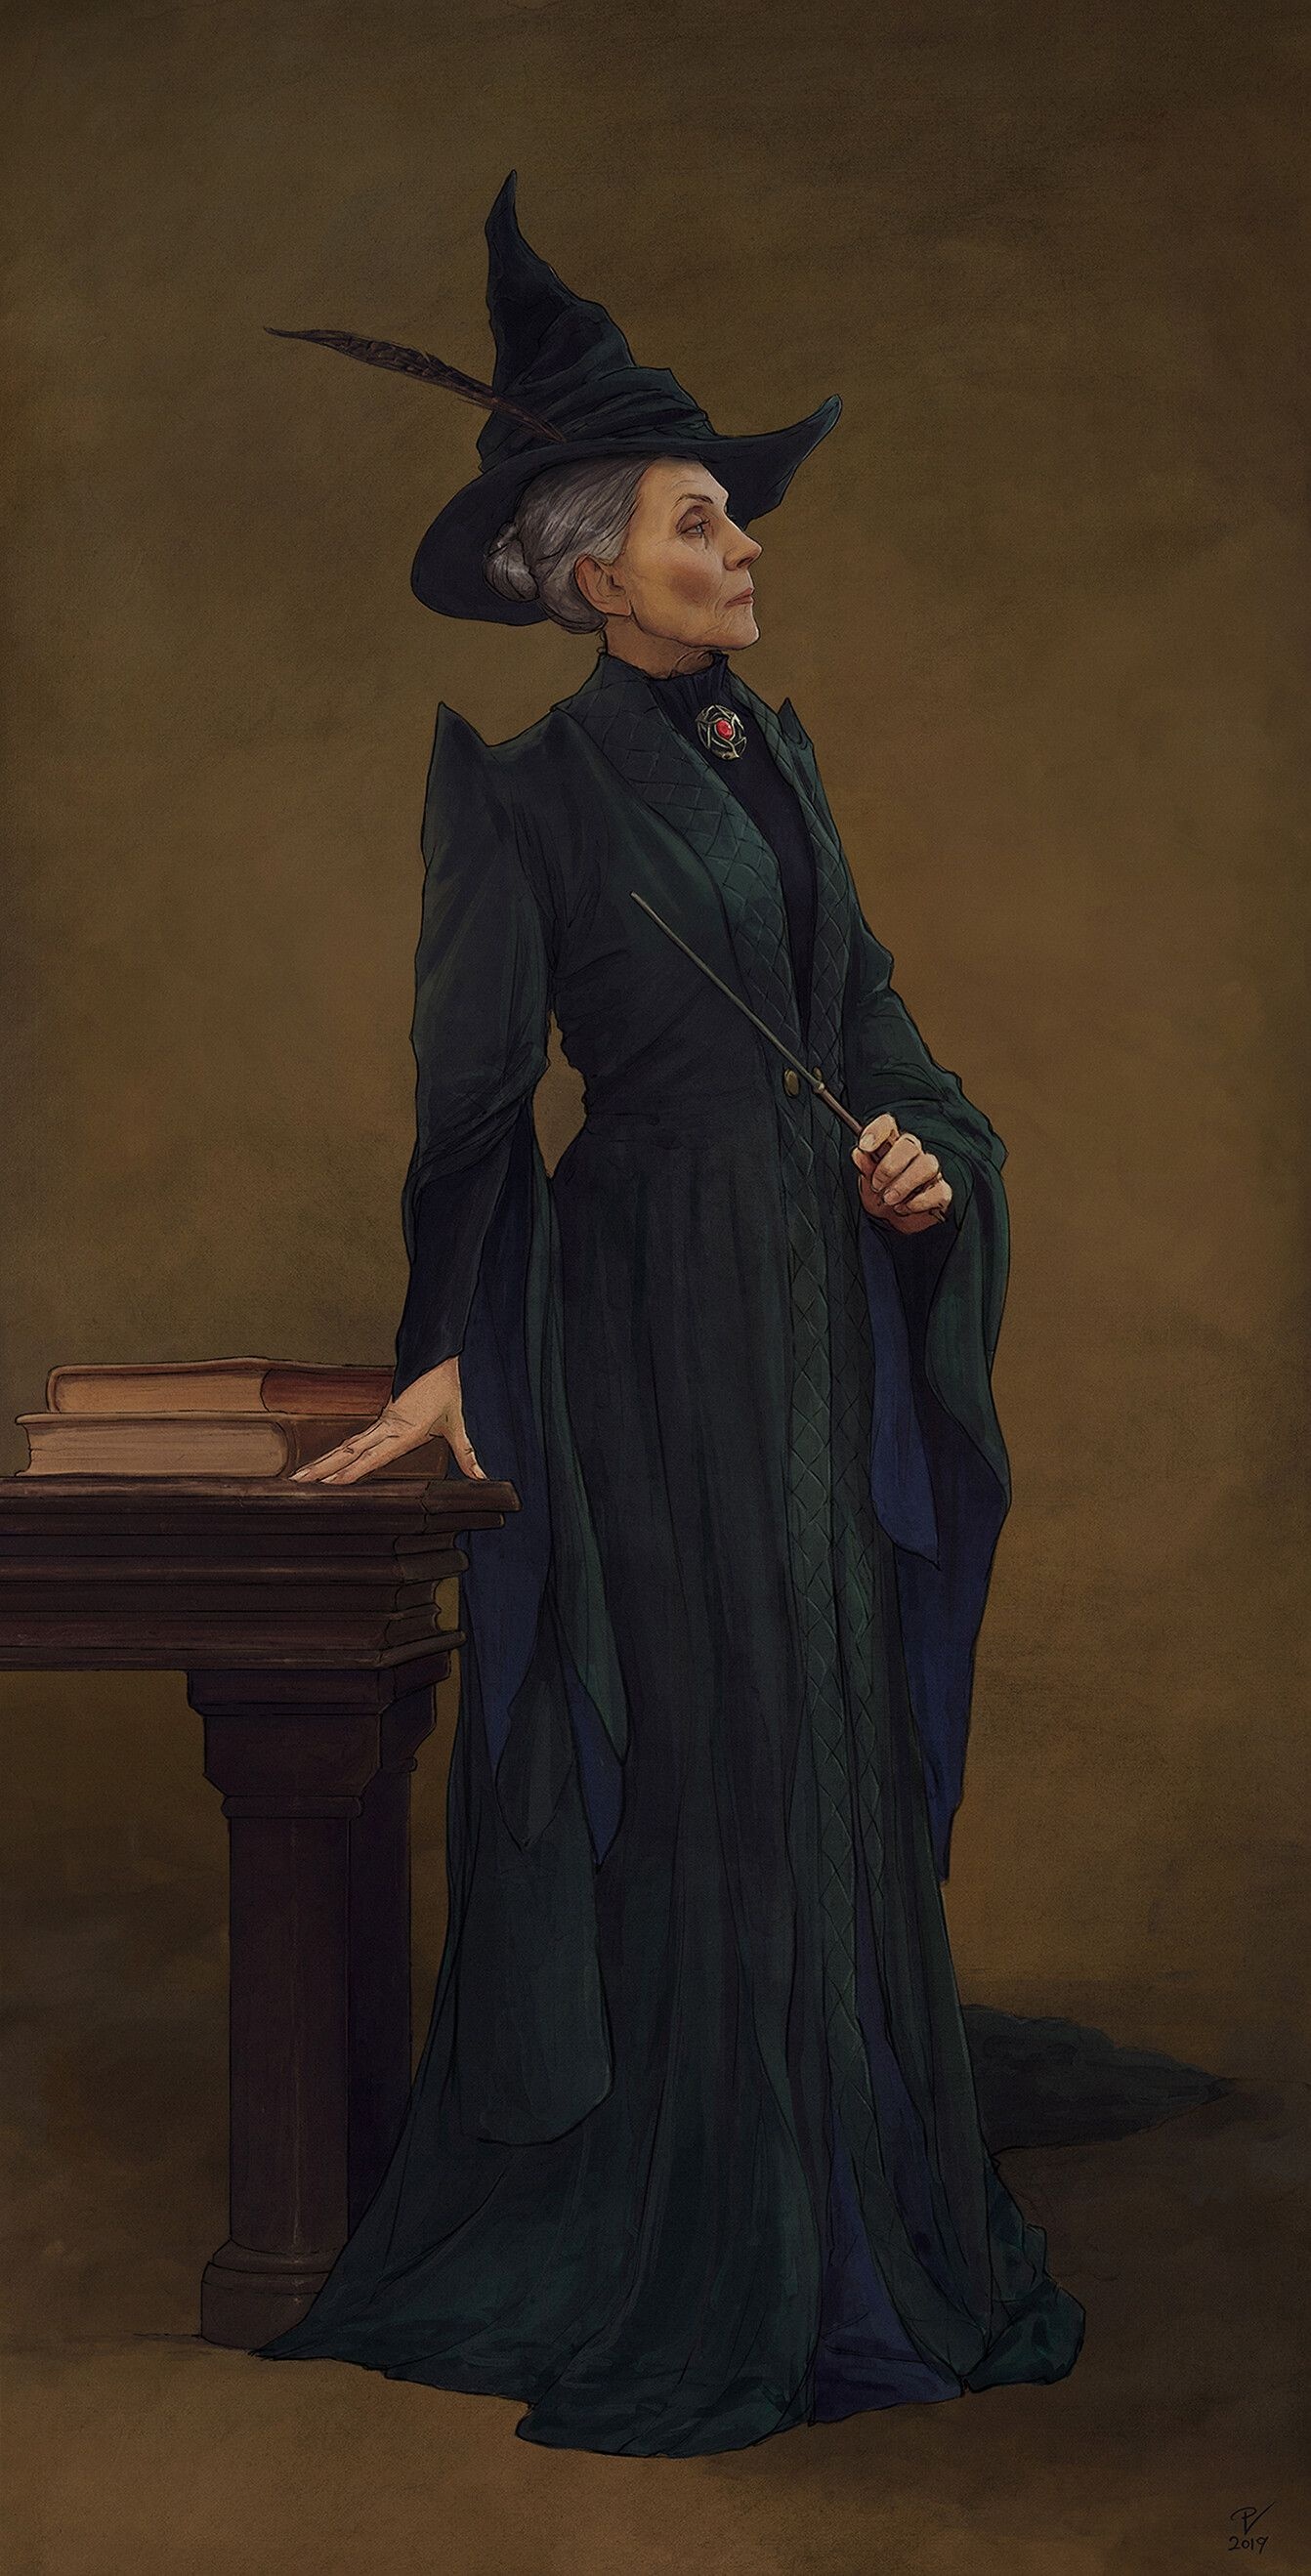 HD wallpaper, Madame M Portrait, Artwork Collection, Harry Potter Illustrations, Mobile Hd Professor Mcgonagall Wallpaper Photo, Professor Mcgonagall Movie, 1350X2640 Hd Phone